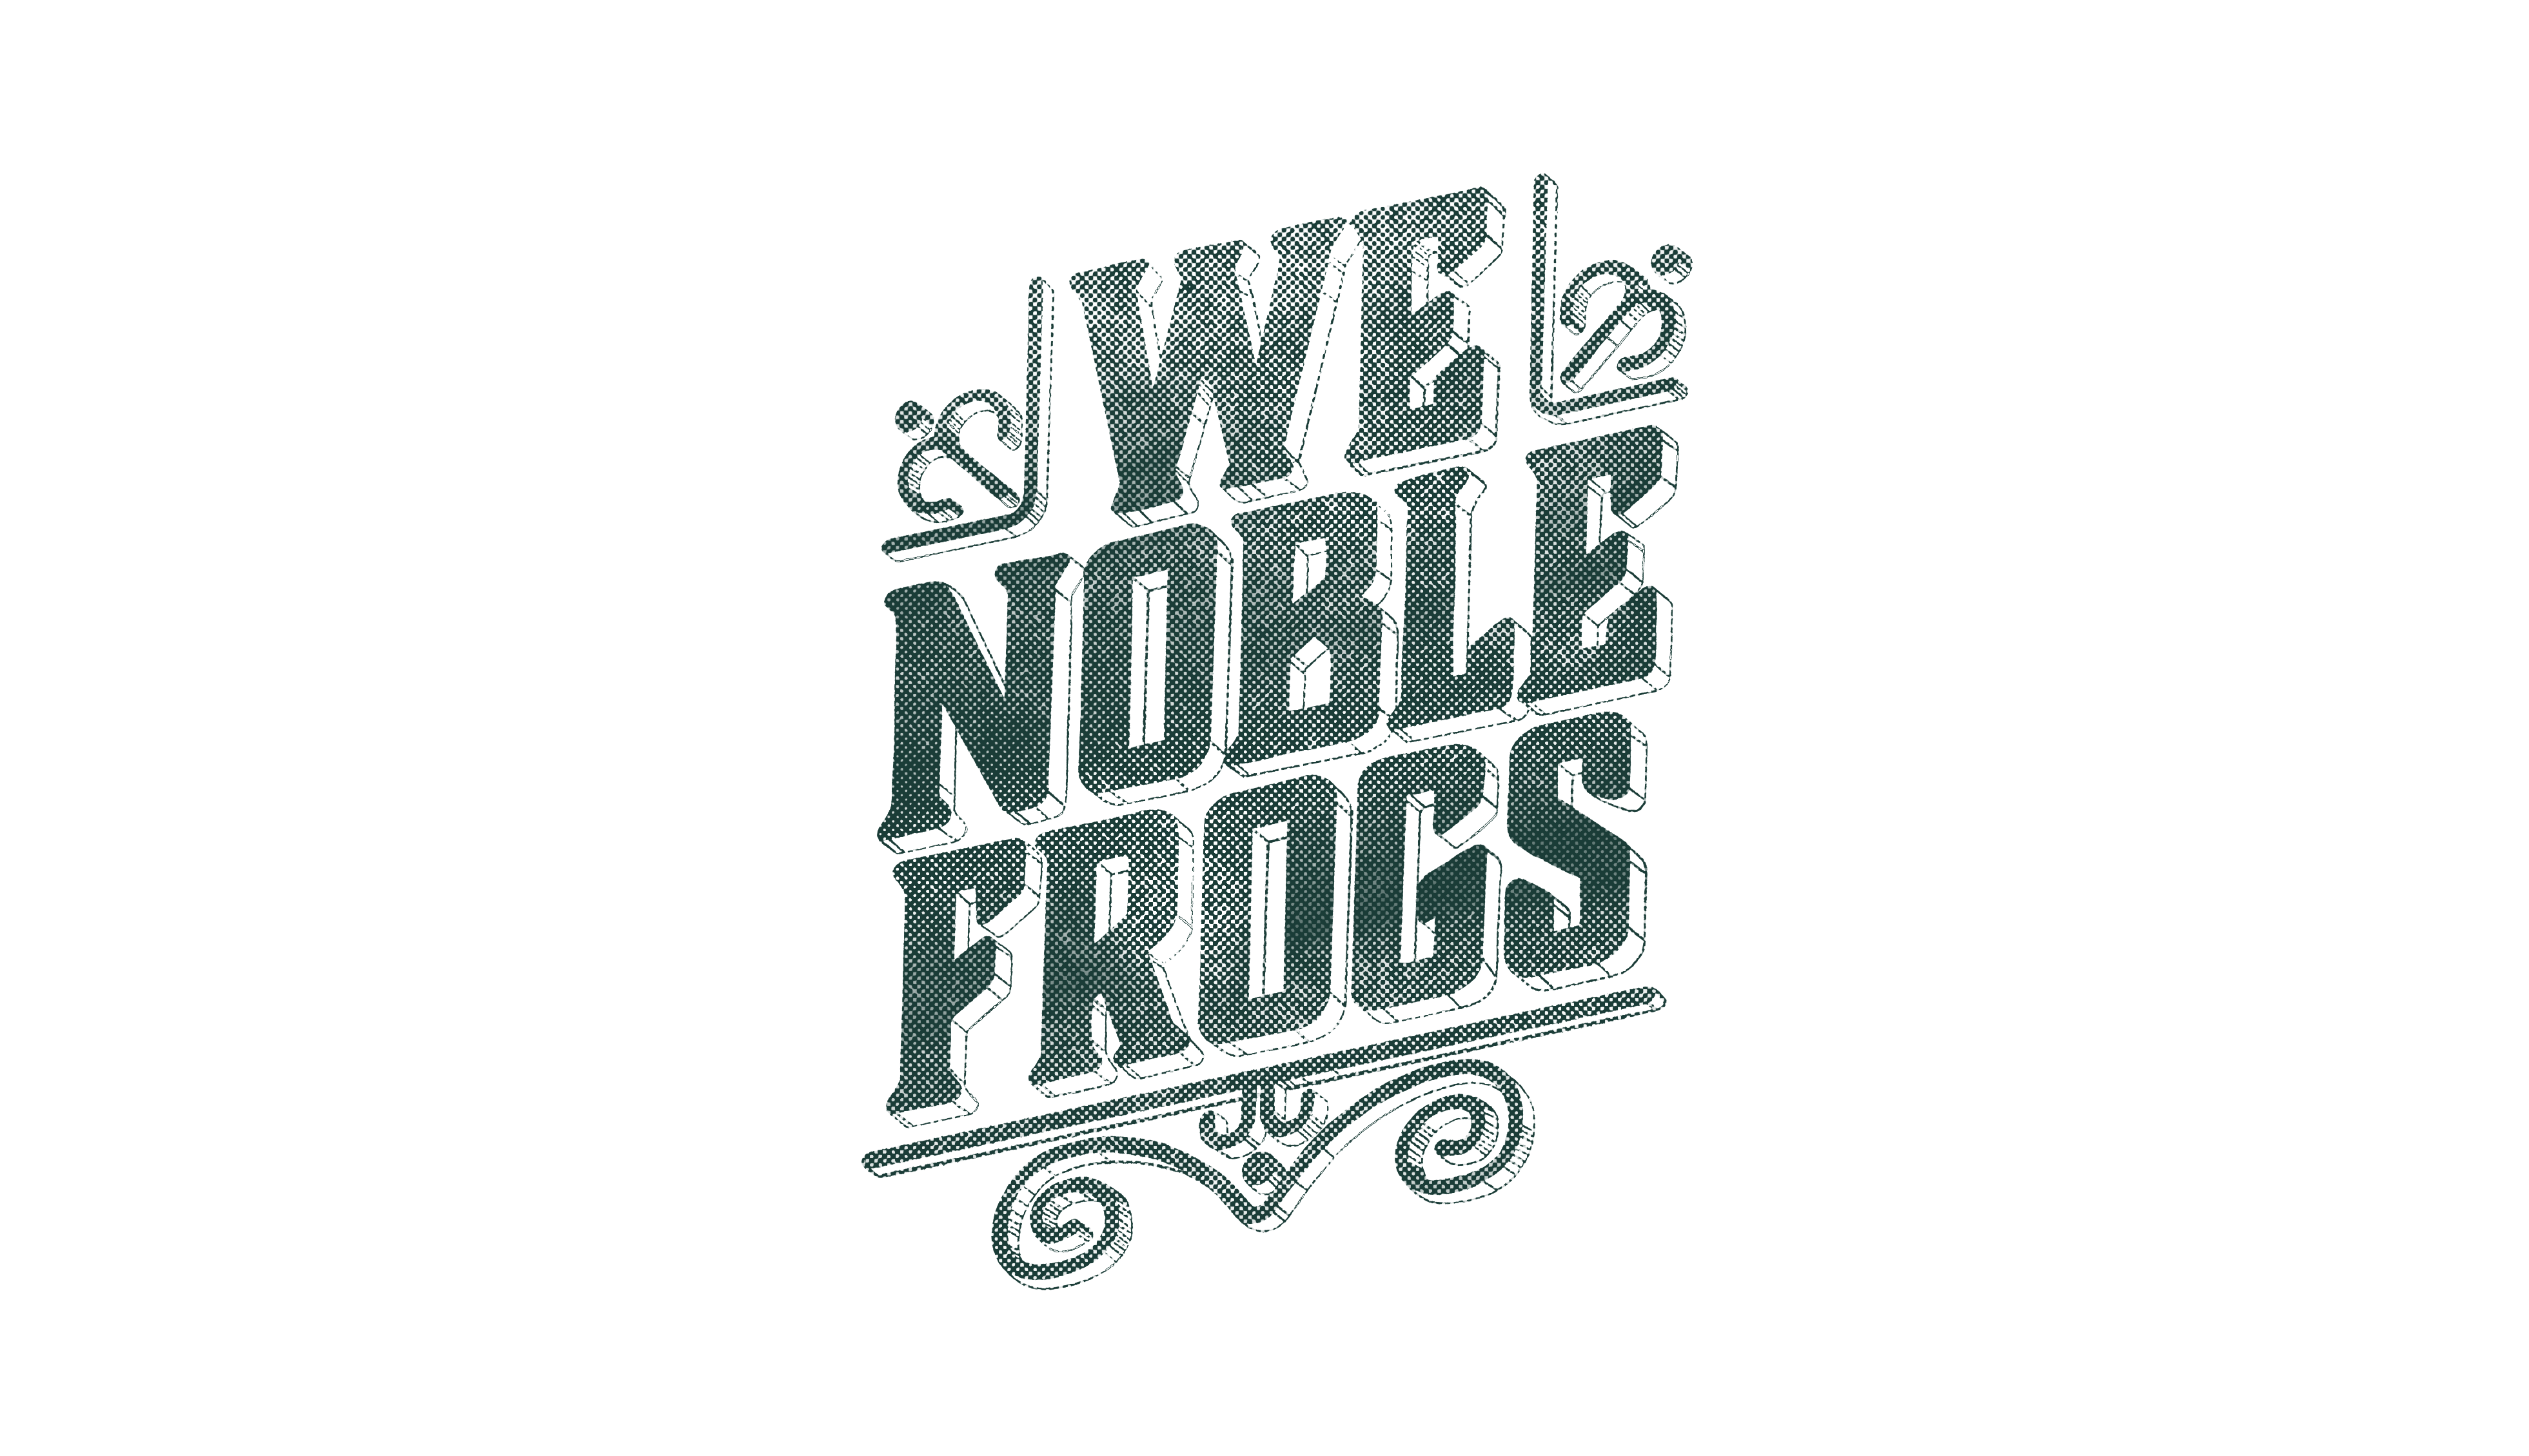 WE NOBLE FROGS